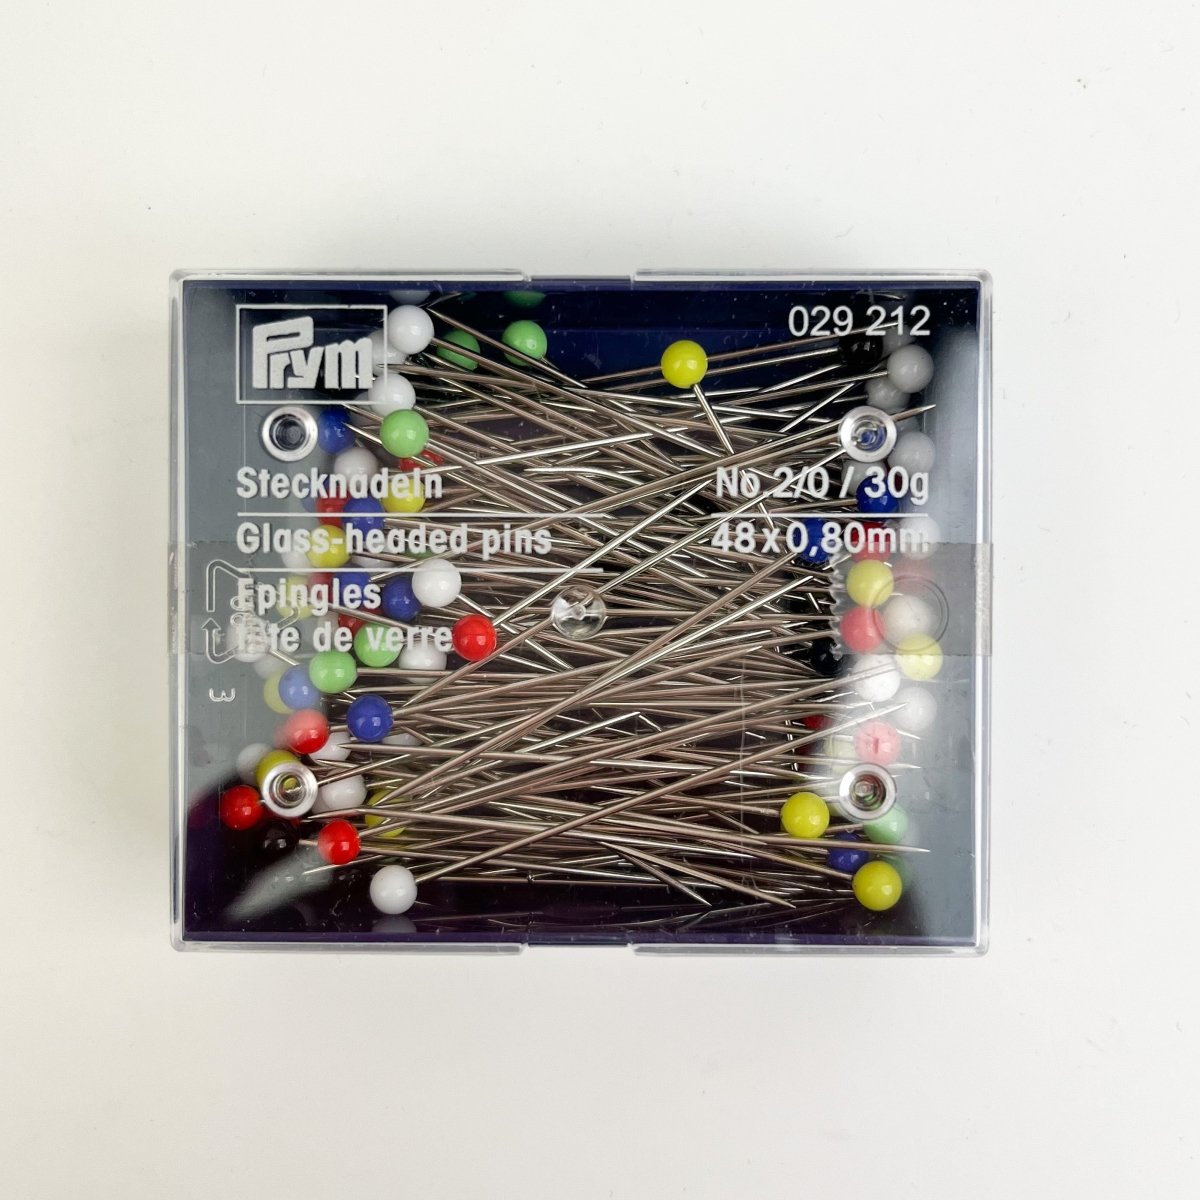 Prym - Glass Head Pins - Assorted Colours - Multiple Sizes - Sewing Gem